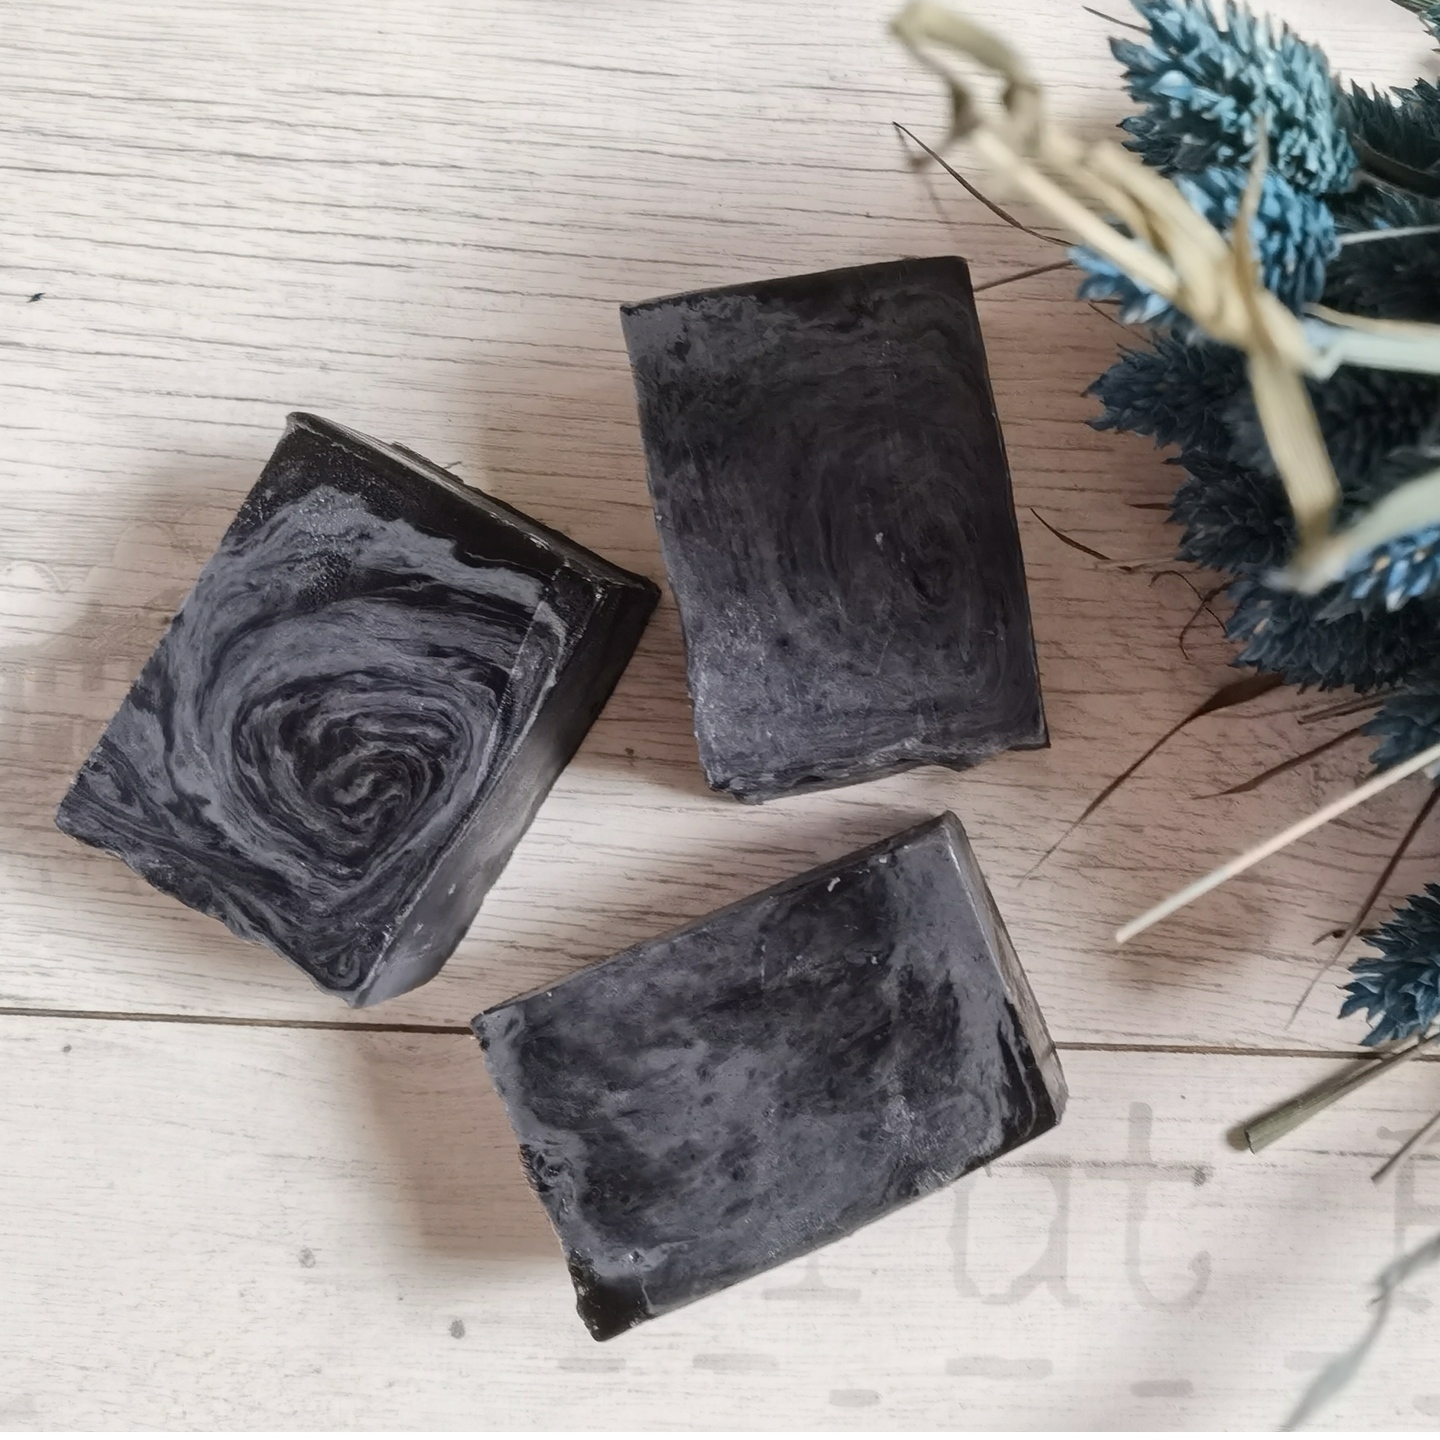 BAMBOO CHARCOAL TEATREE MINT HAND SOAP